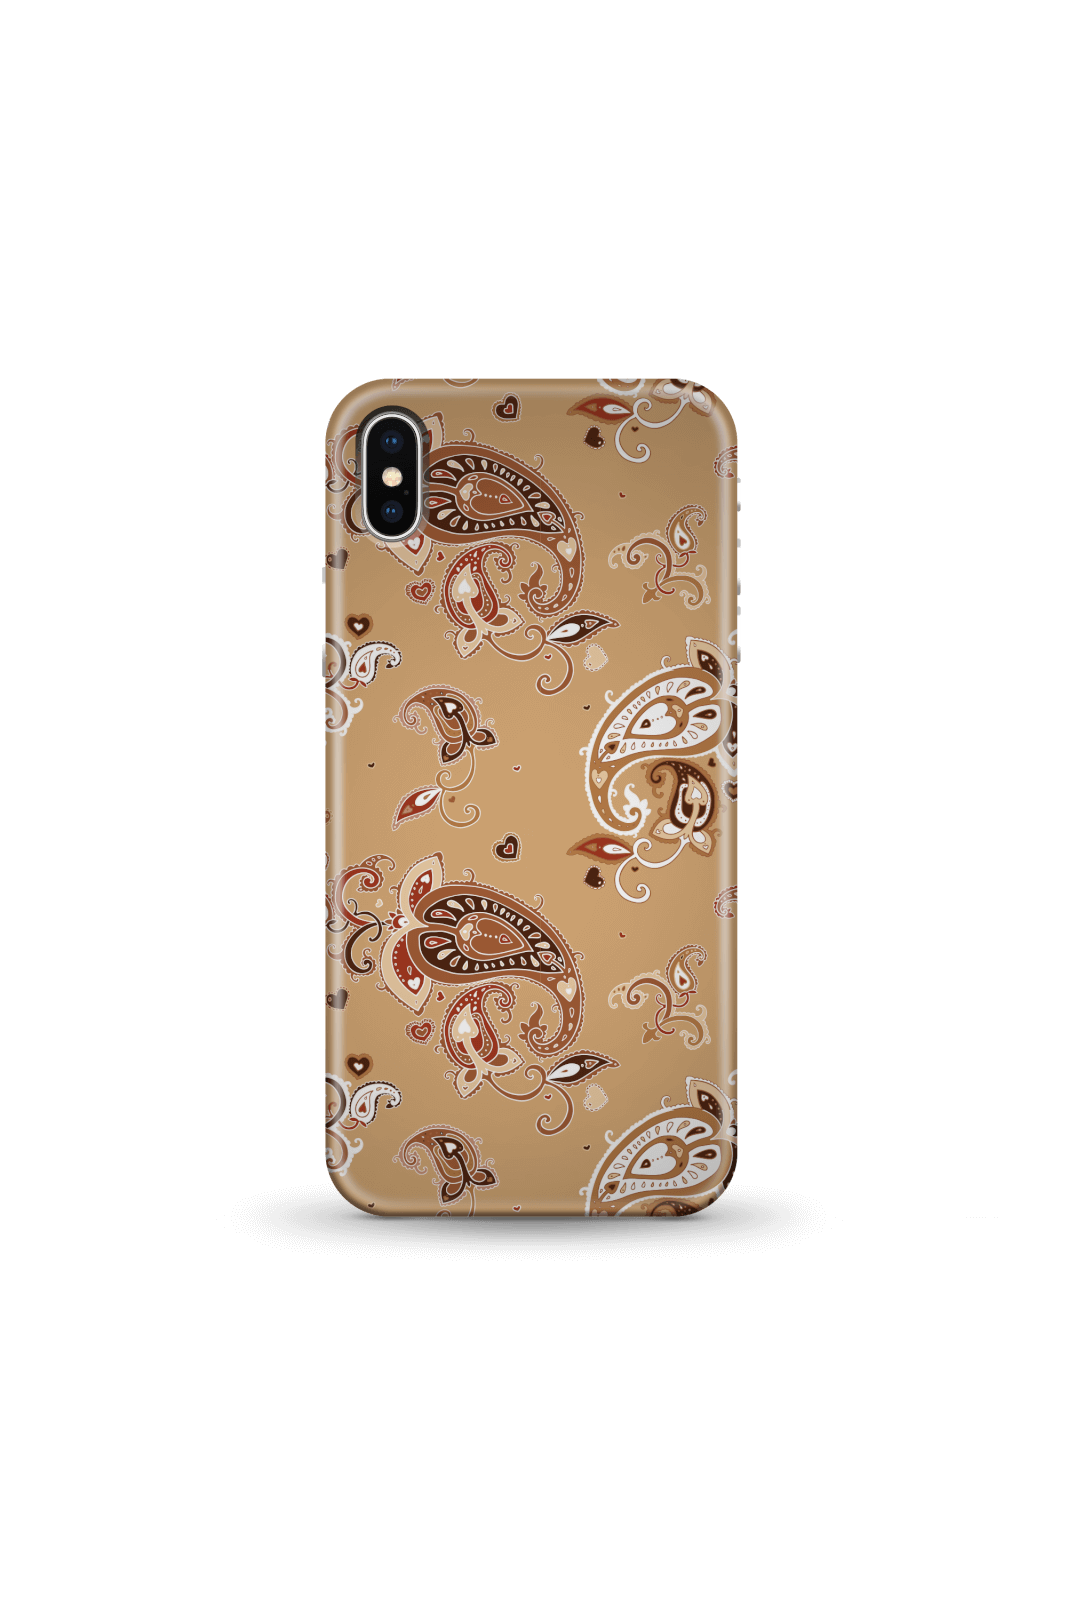 Brown Paisley Phone Case for iPhone and Android - iPhone 5/5s - Snap Case - Matte